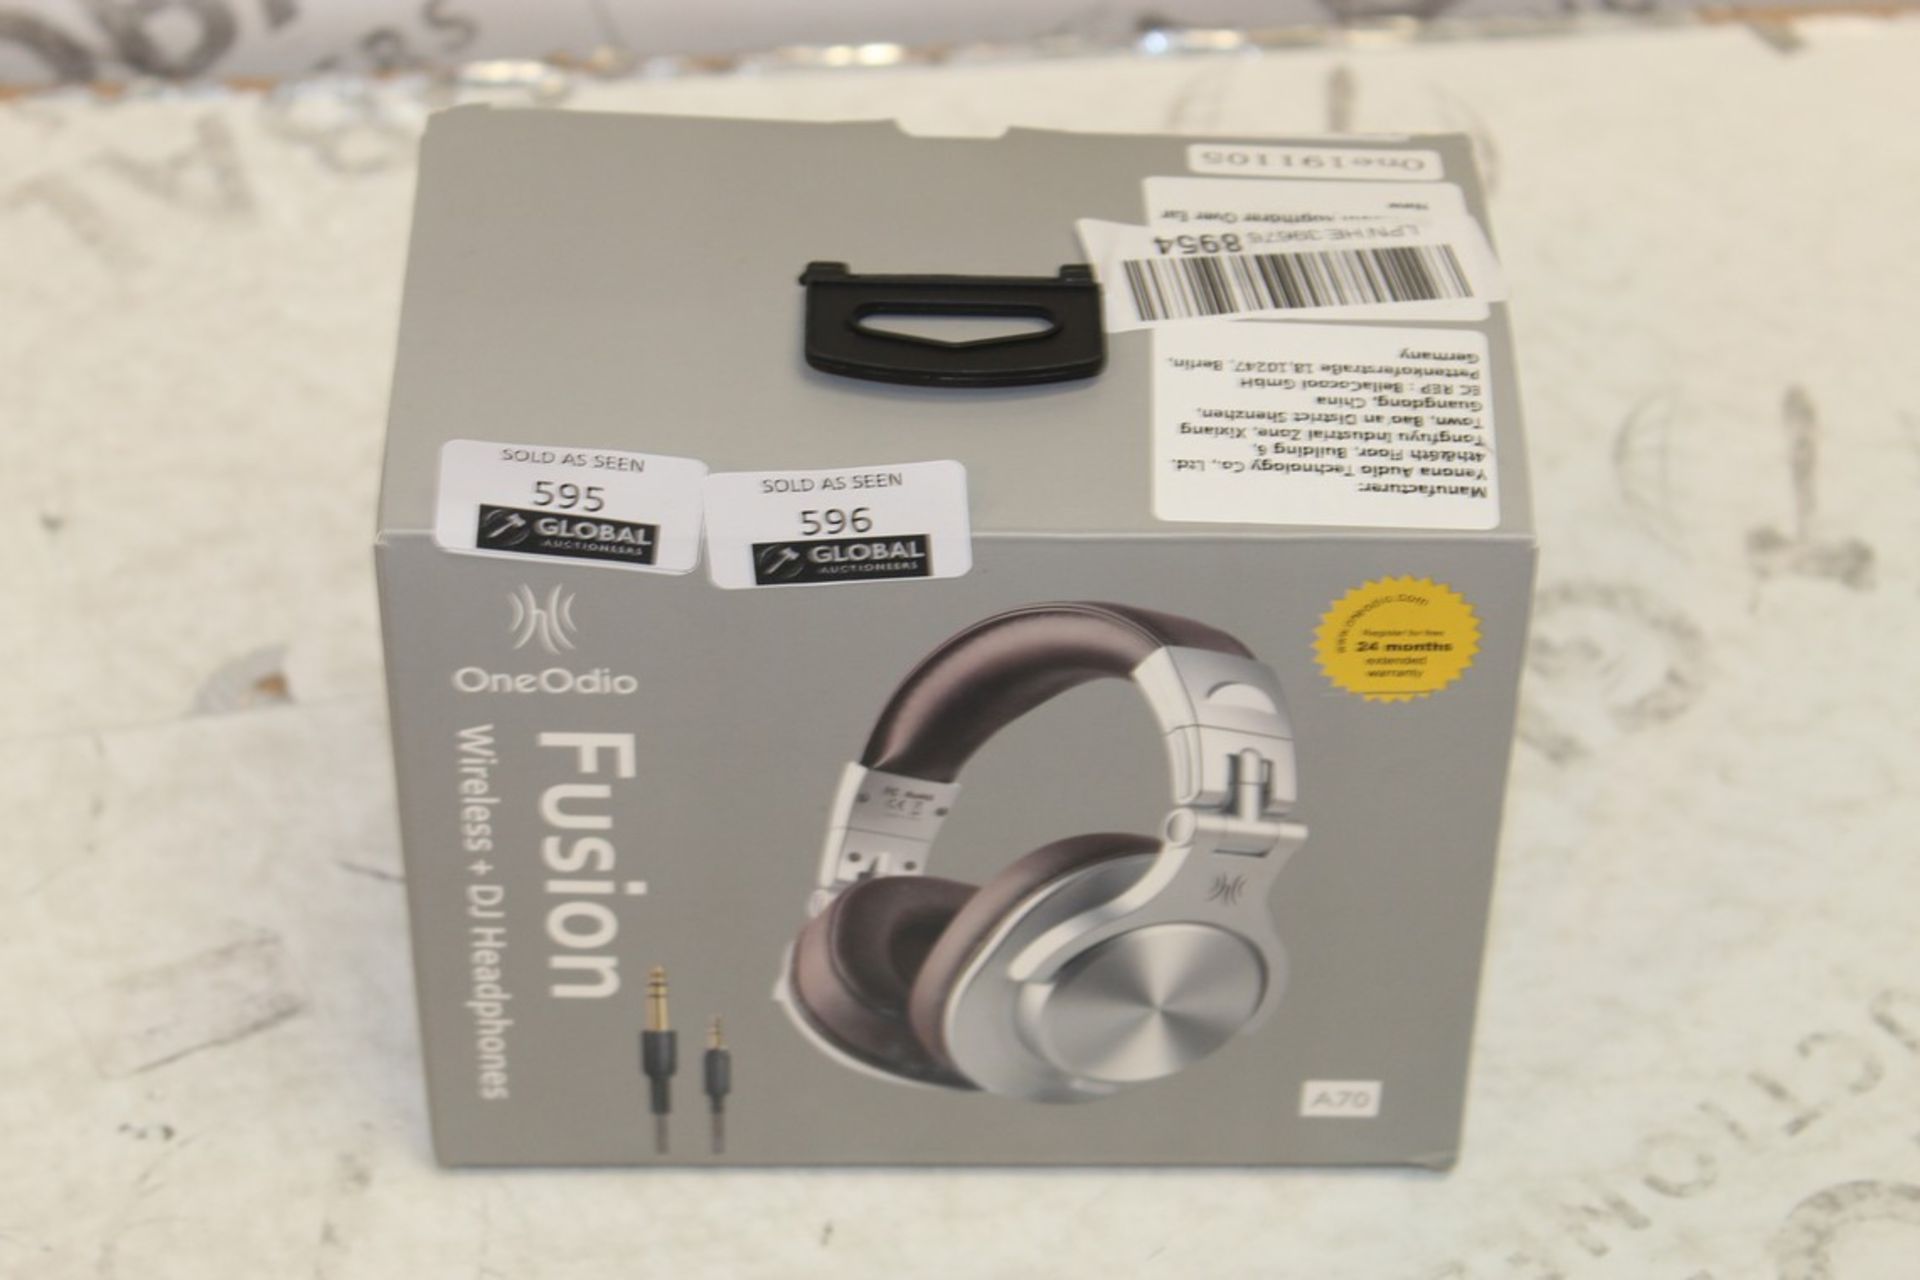 Boxed Brand New Pair One Audio Fusion A70 Silver Wireless DJ Headphones RRP £55